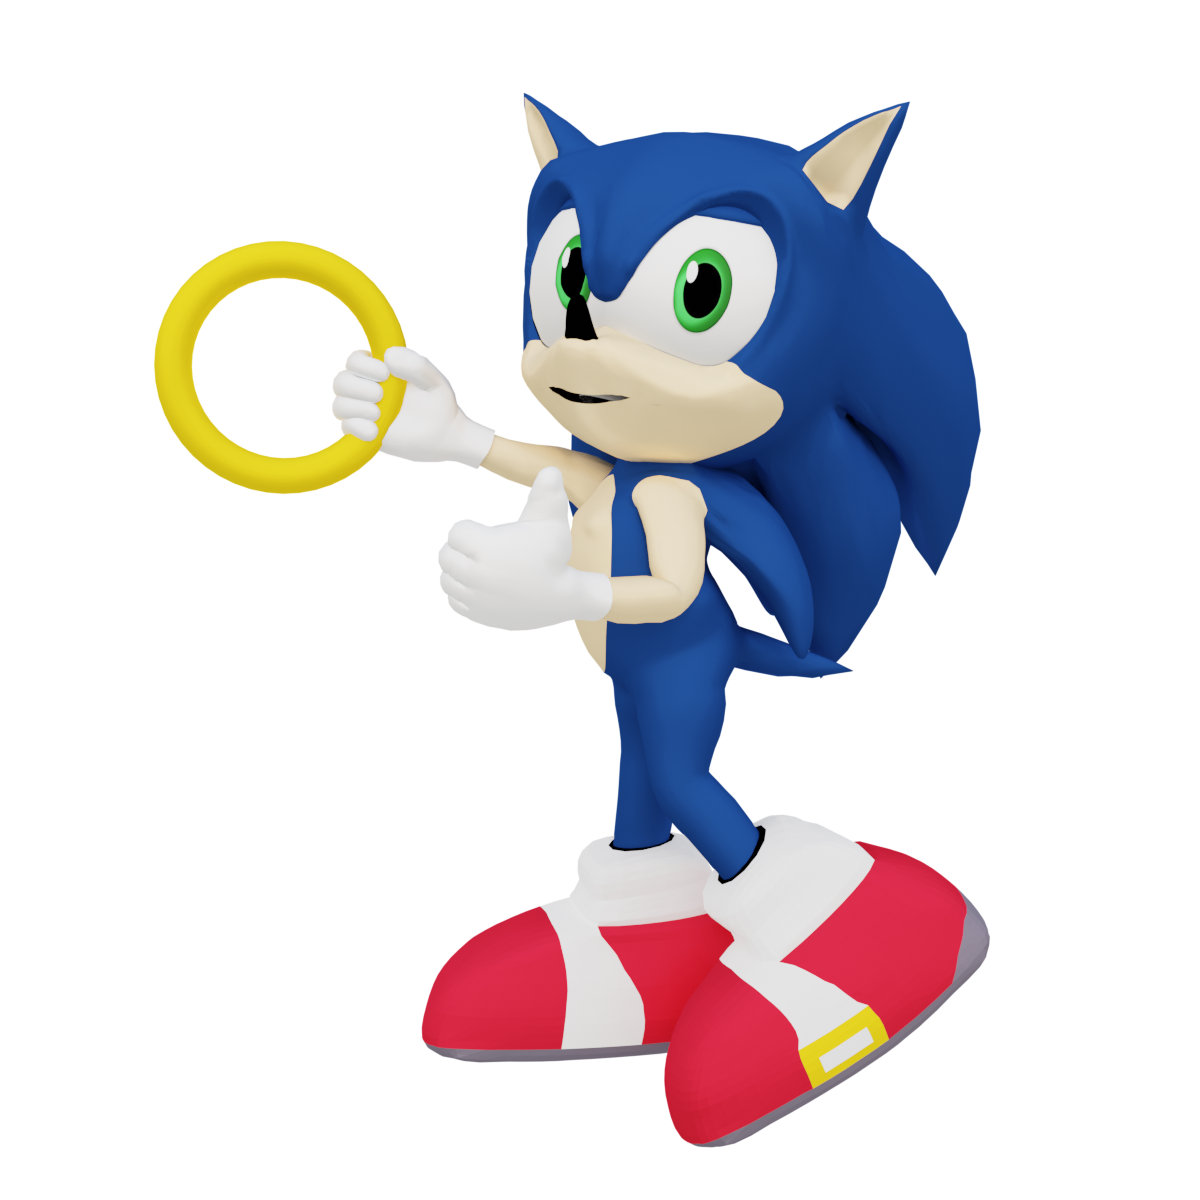 Sonic And His Bag Of Rings by CoolCSD1986 on DeviantArt